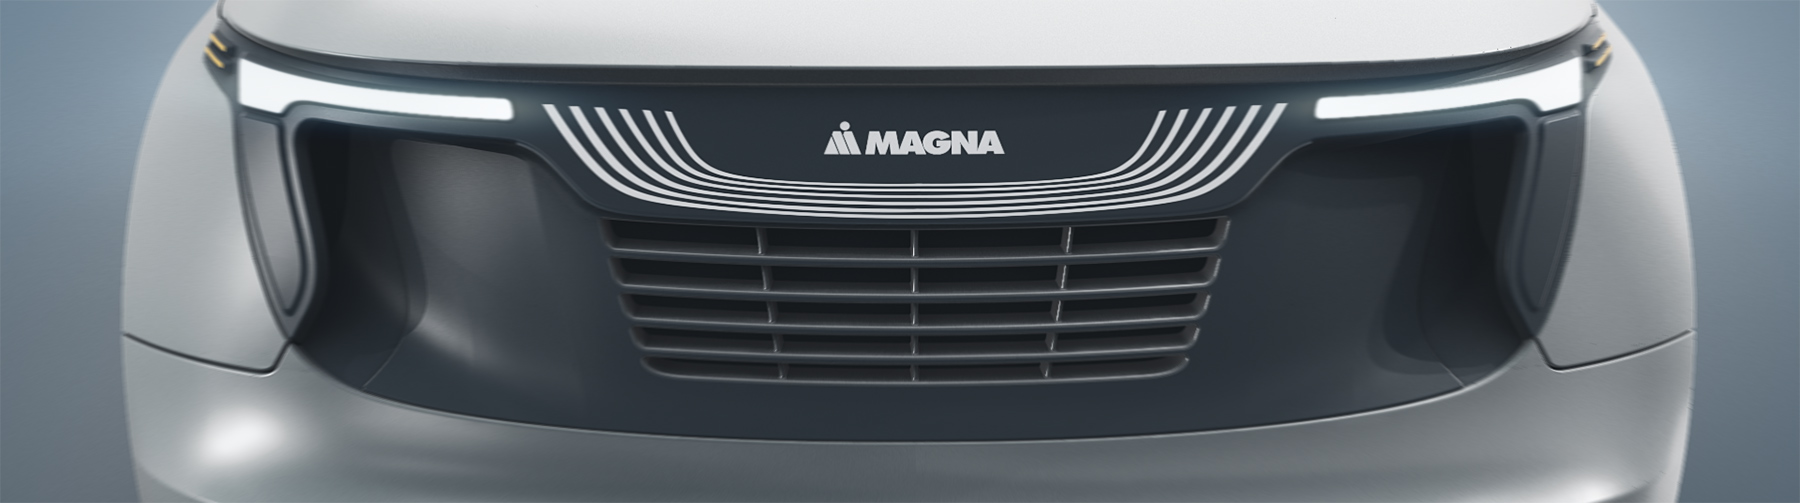 Front grill of a vehicle with Magna logo